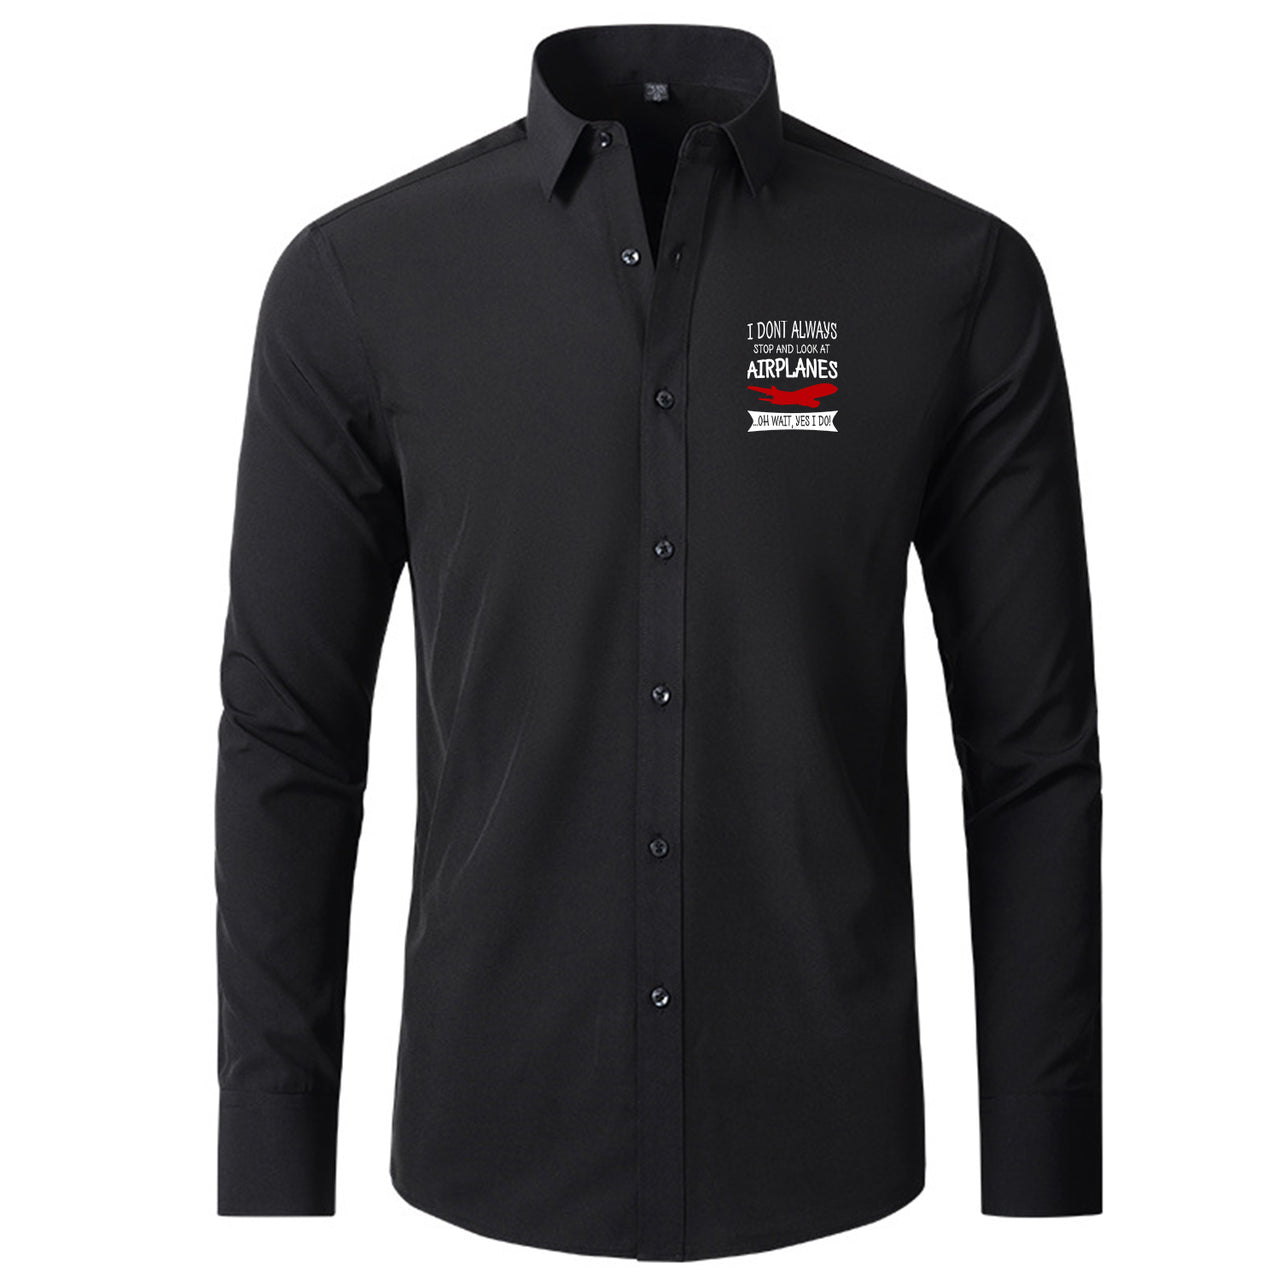 I Don't Always Stop and Look at Airplanes Designed Long Sleeve Shirts